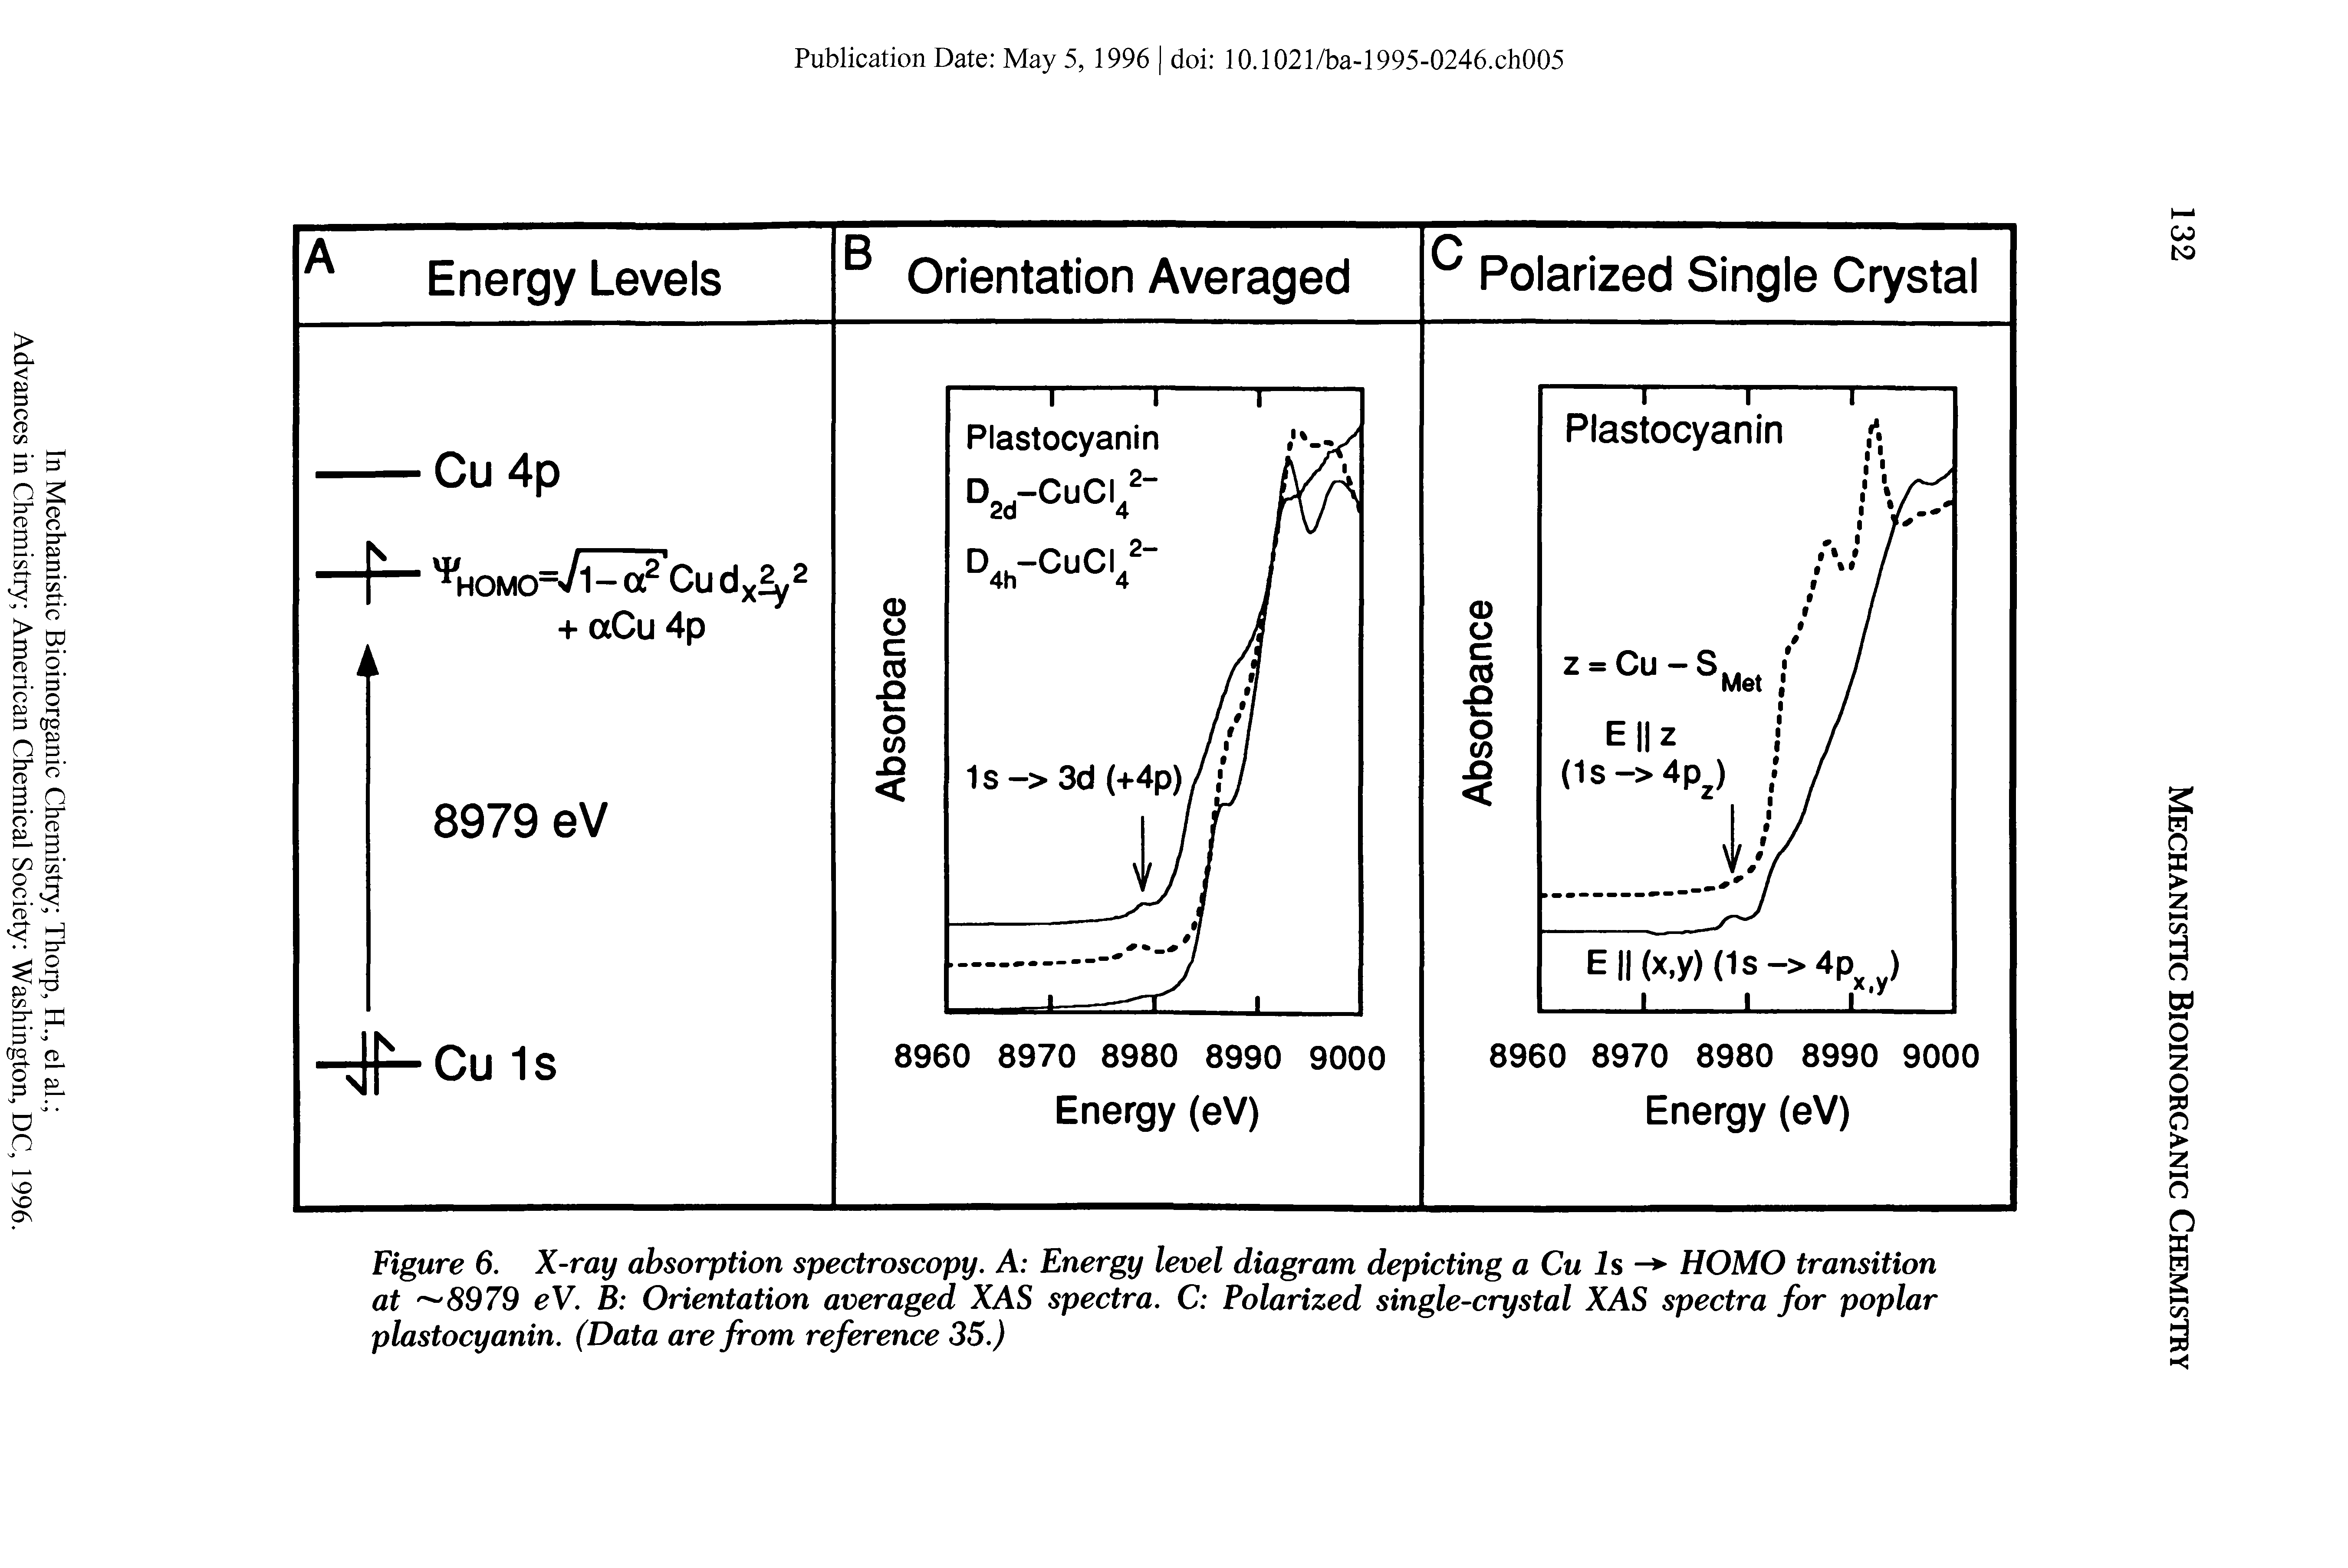 Figure 6. X-ray absorption spectroscopy. A Energy level diagram depicting a Cu Is - HOMO transition at 8979 eV. B Orientation averaged XAS spectra. C Polarized single-crystal XAS spectra for poplar plastocyanin. (Data are from reference 35.)...